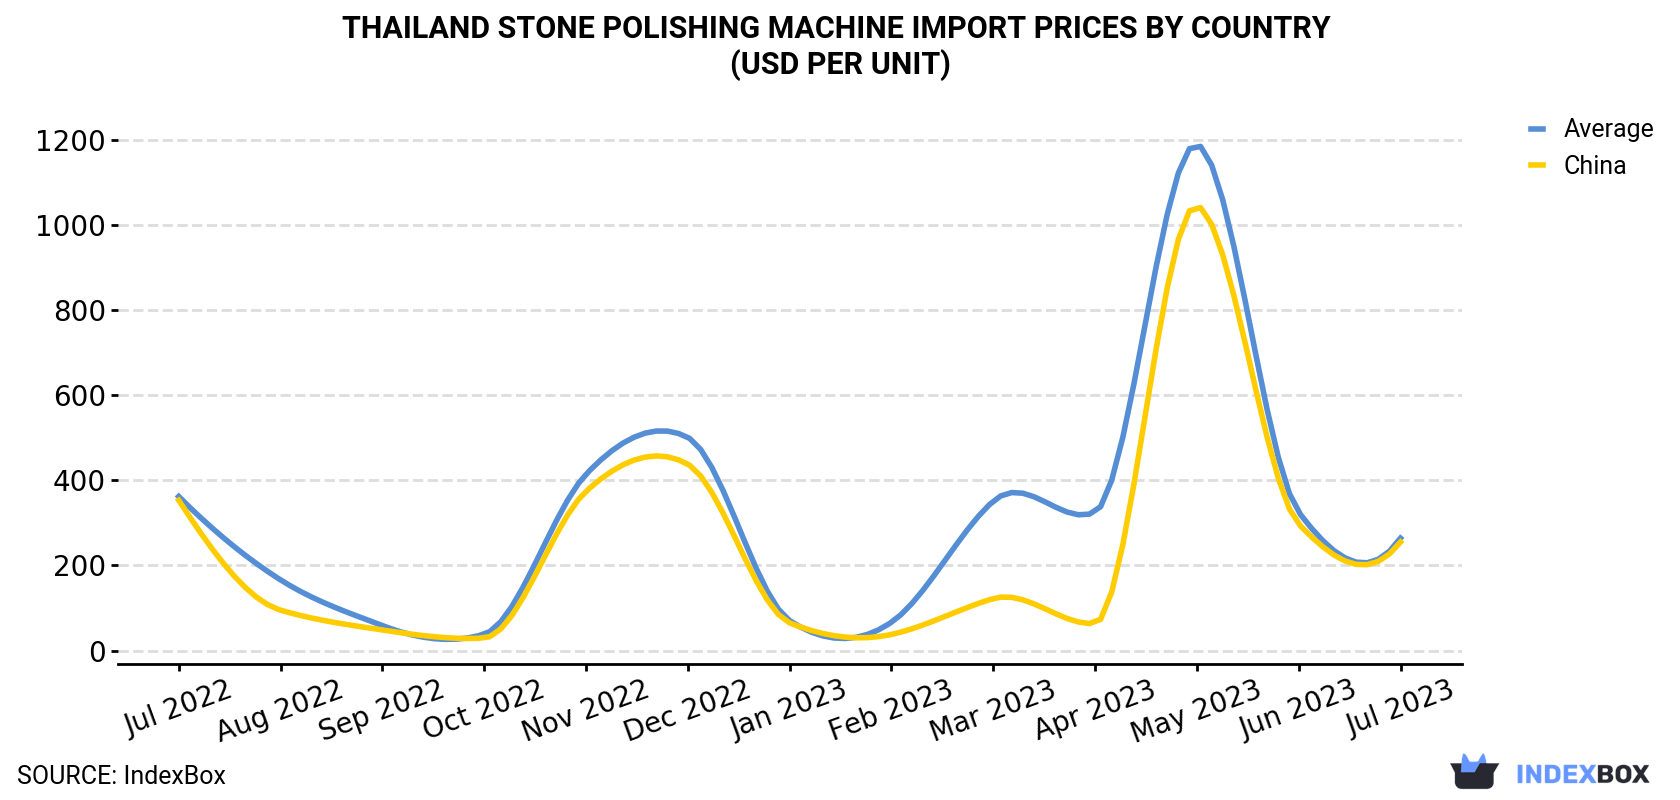 Thailand Stone Polishing Machine Import Prices By Country (USD Per Unit)